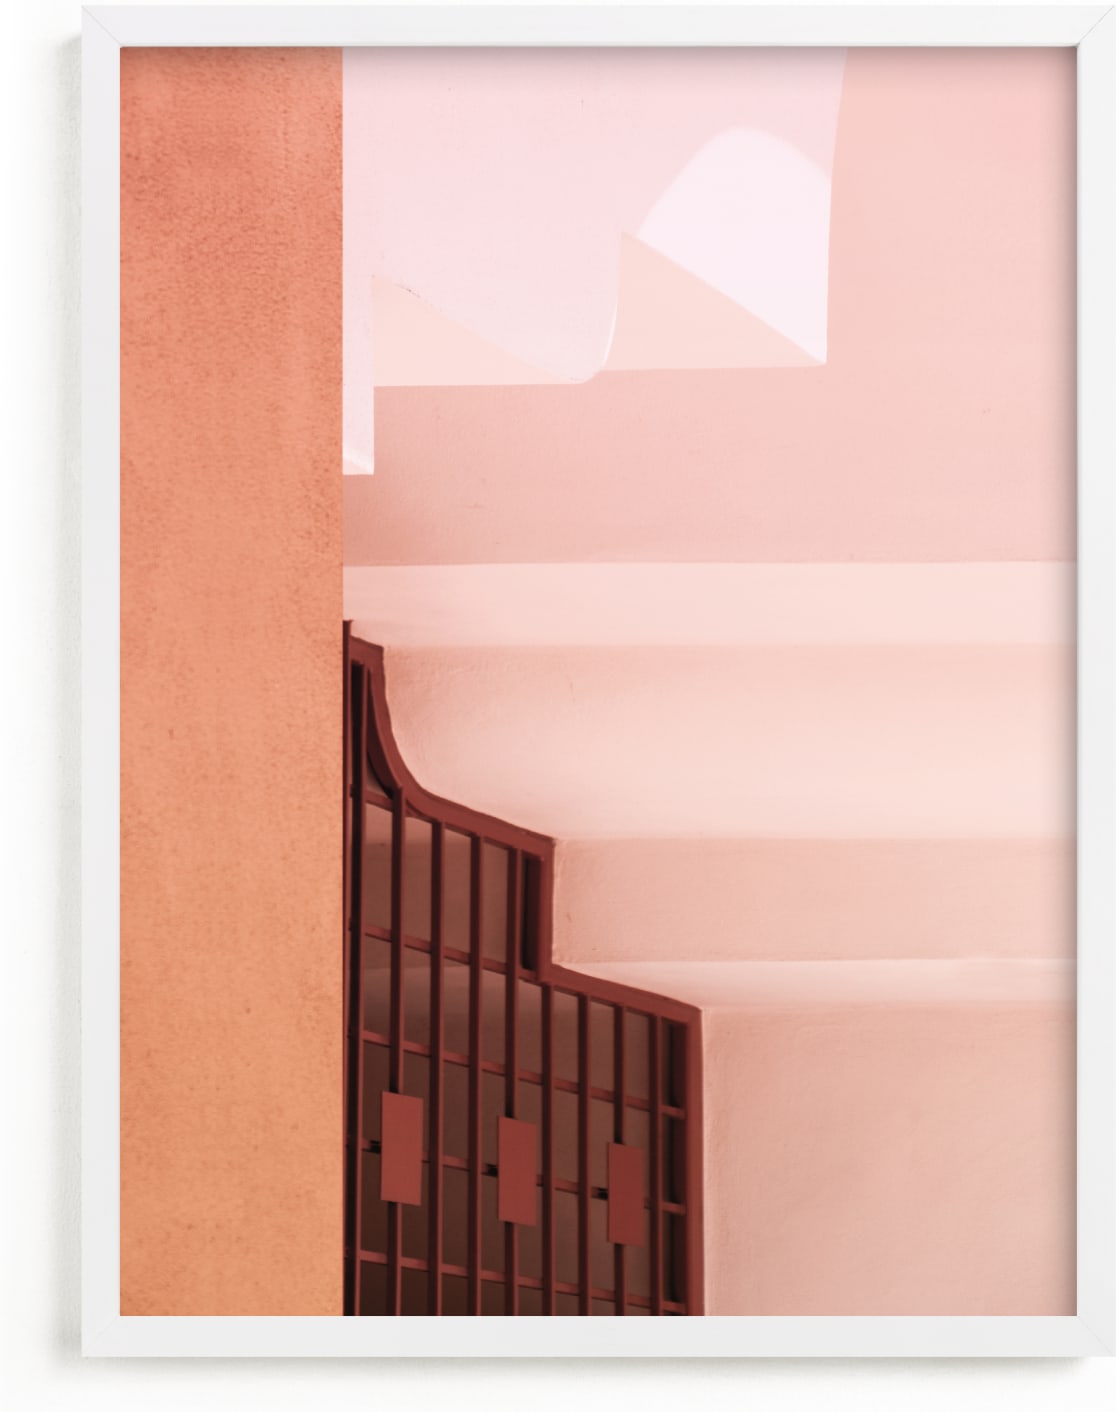 This is a pink art by Lisa Sundin called Moroccan Angles II.